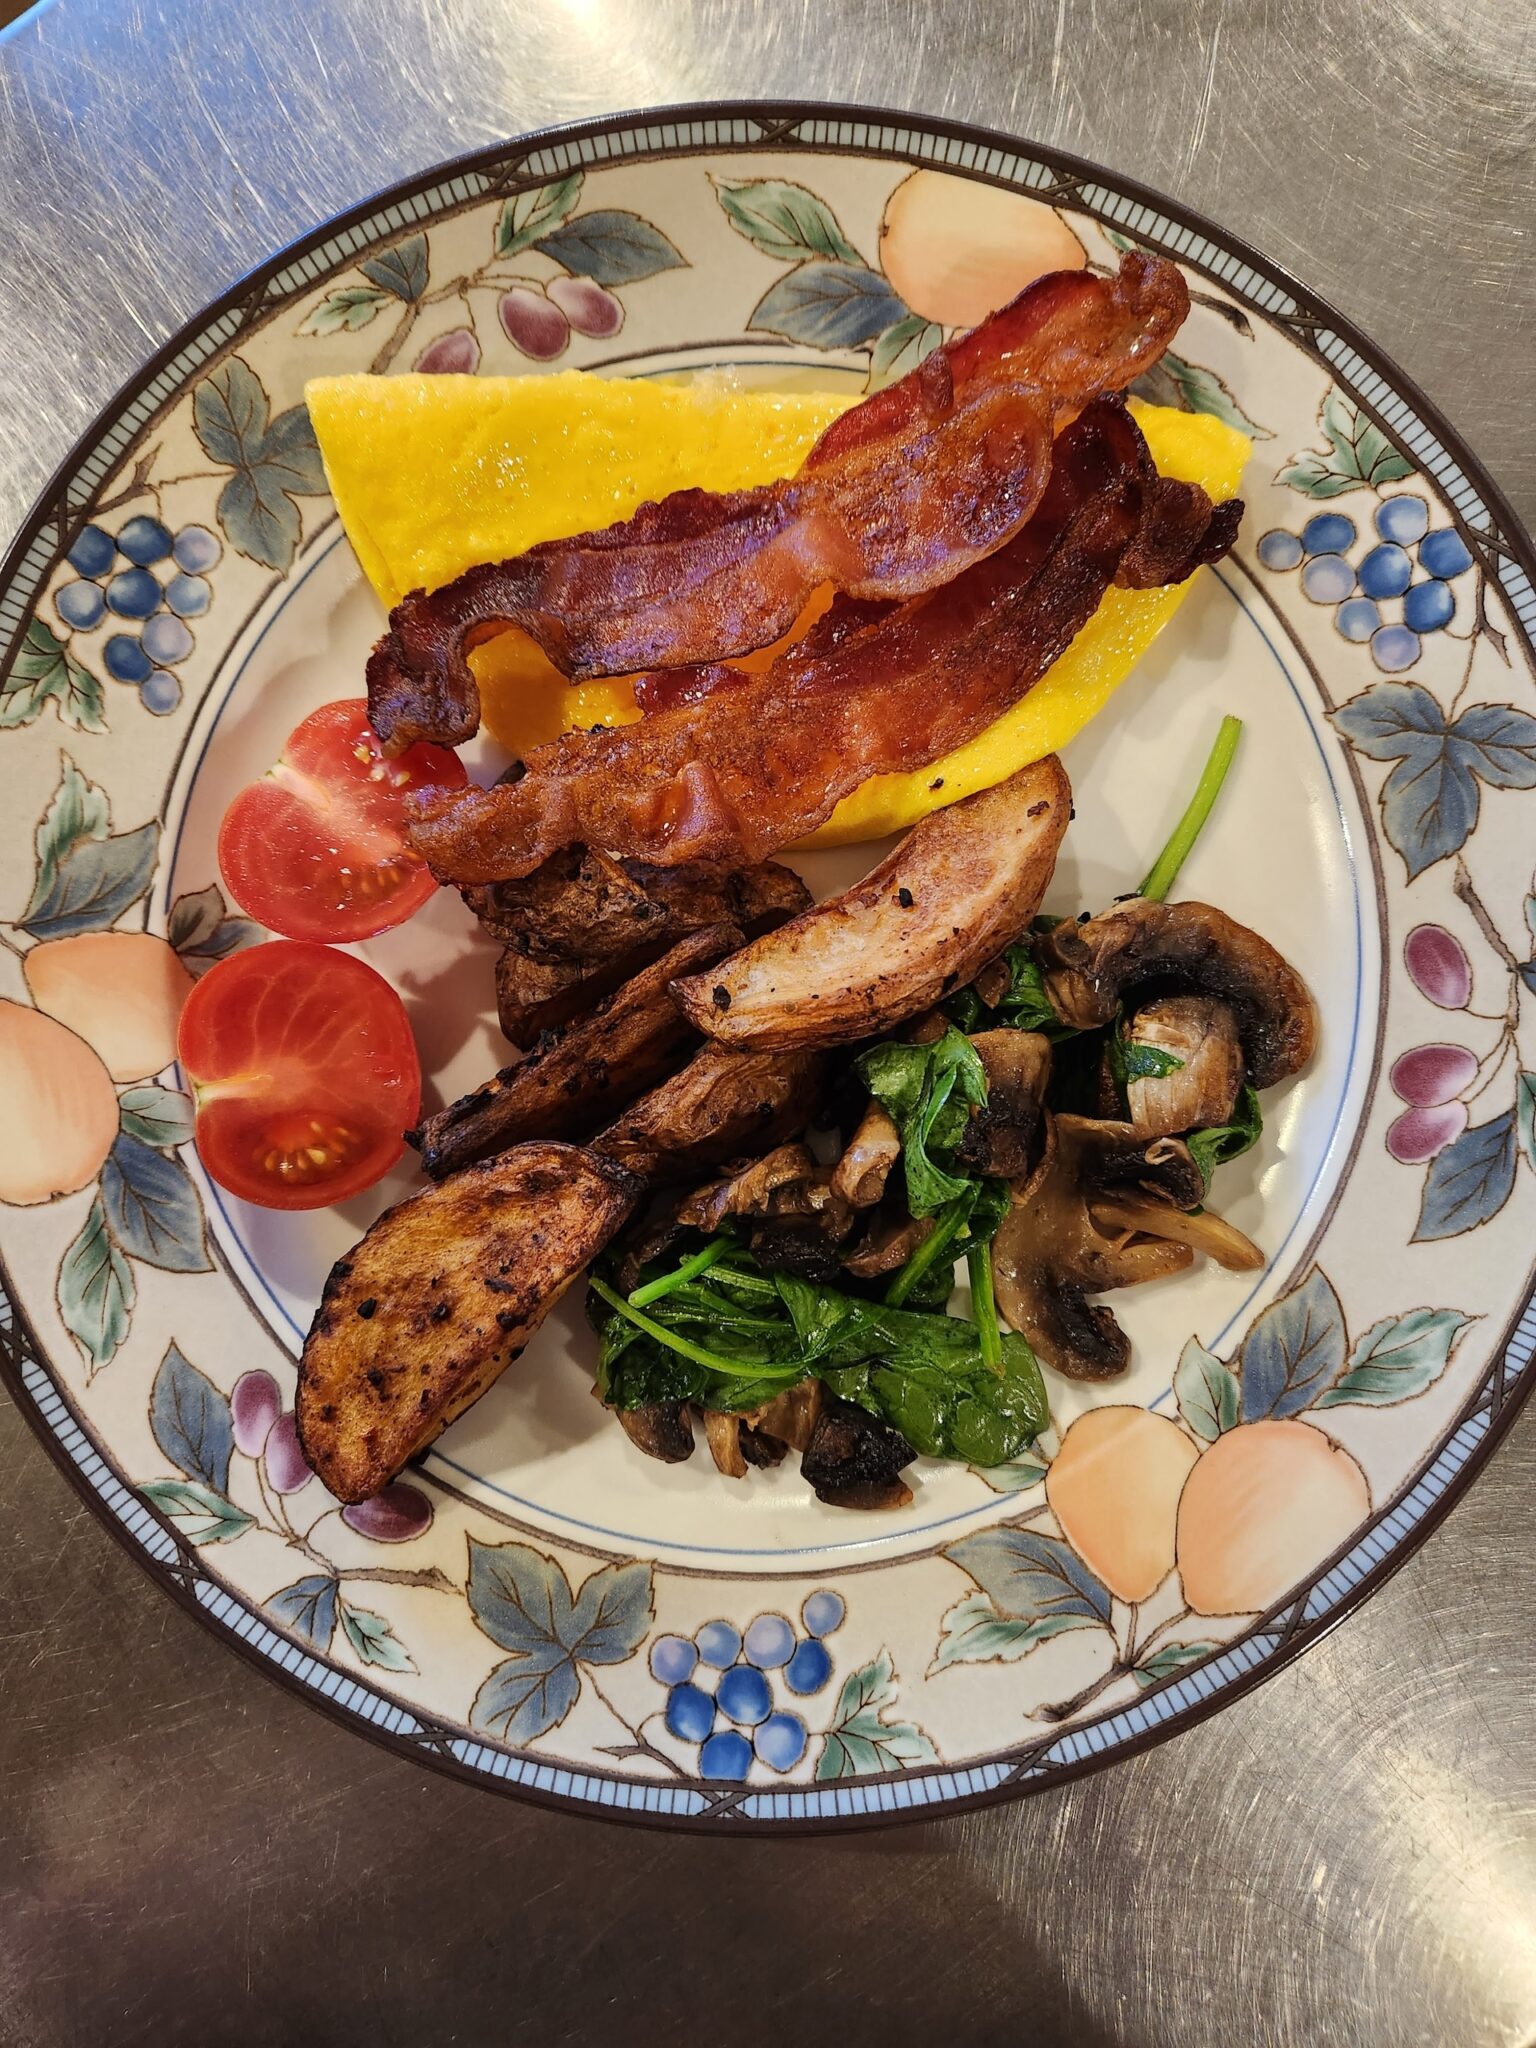 Cheese omelette, bacon, roasted potatoes, mushrooms, spinach, tomatoes